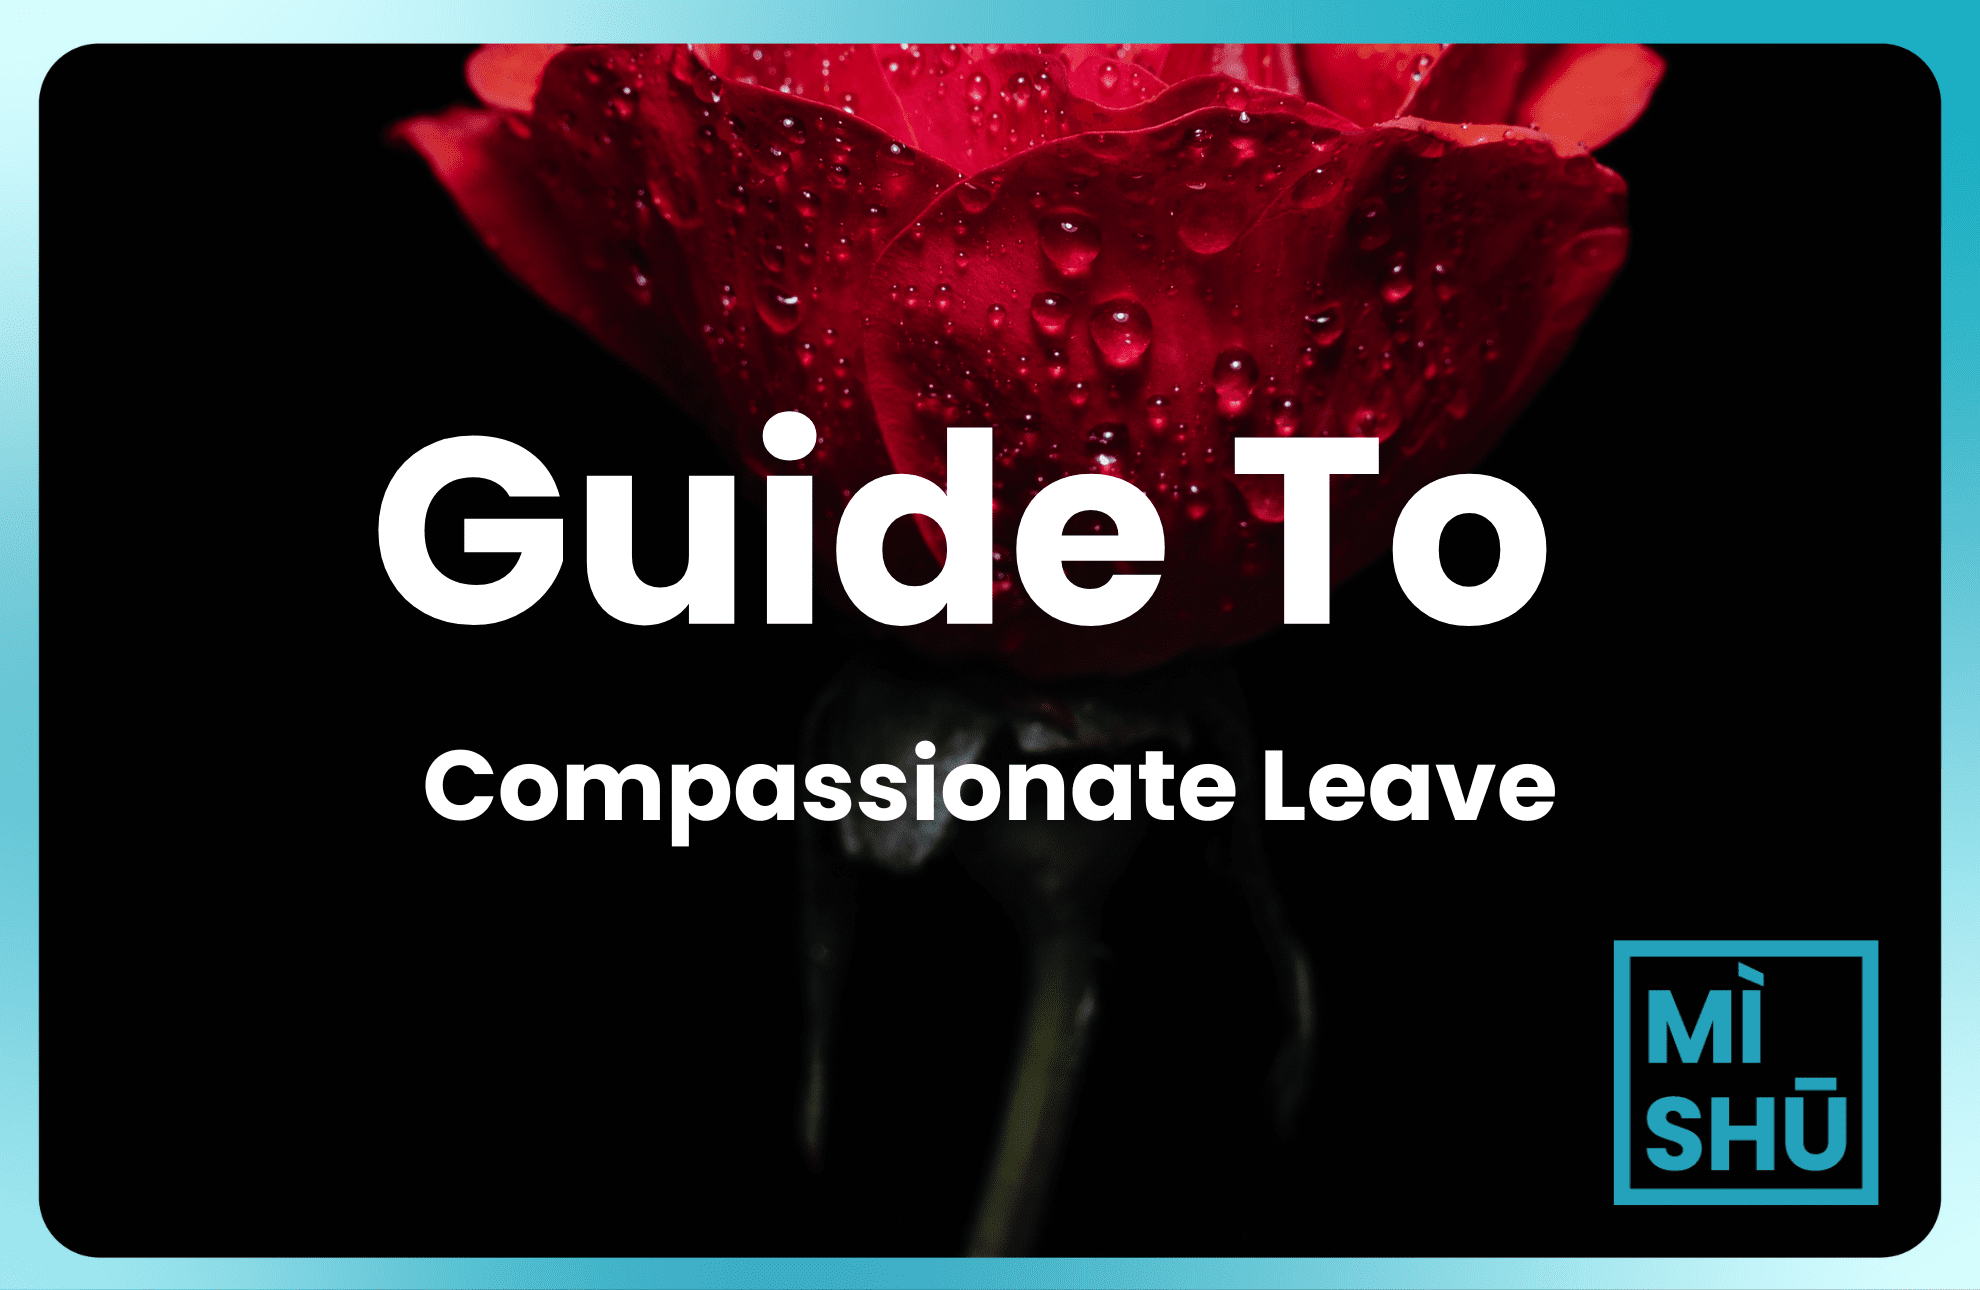 a guide for employers to compassionate leave entitlements and policies in Malaysia